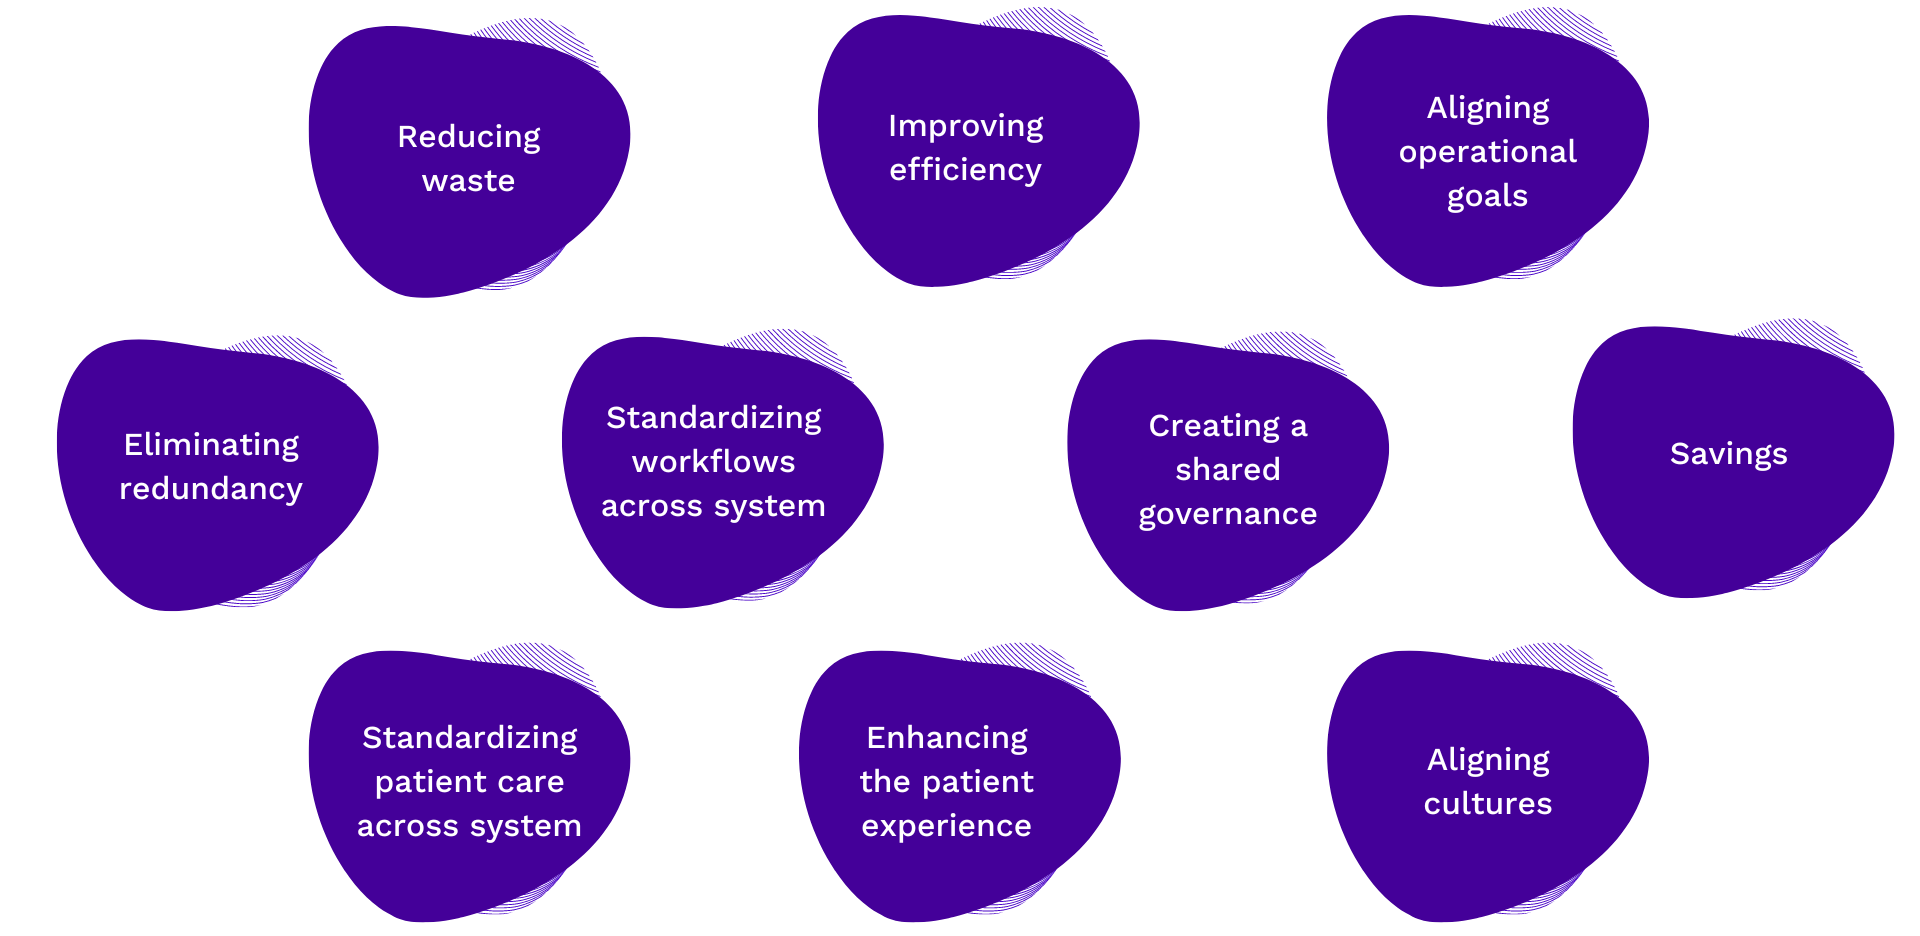 benefits-include-reducing-waste-improving-efficiency-aligning-goals-eliminating-redundancy-standardizing-workflows-across-systems-creating-shared-governance-savings-standardizing-patient-care-across-system-enhancing-the-patient-experience-aligning-cultures